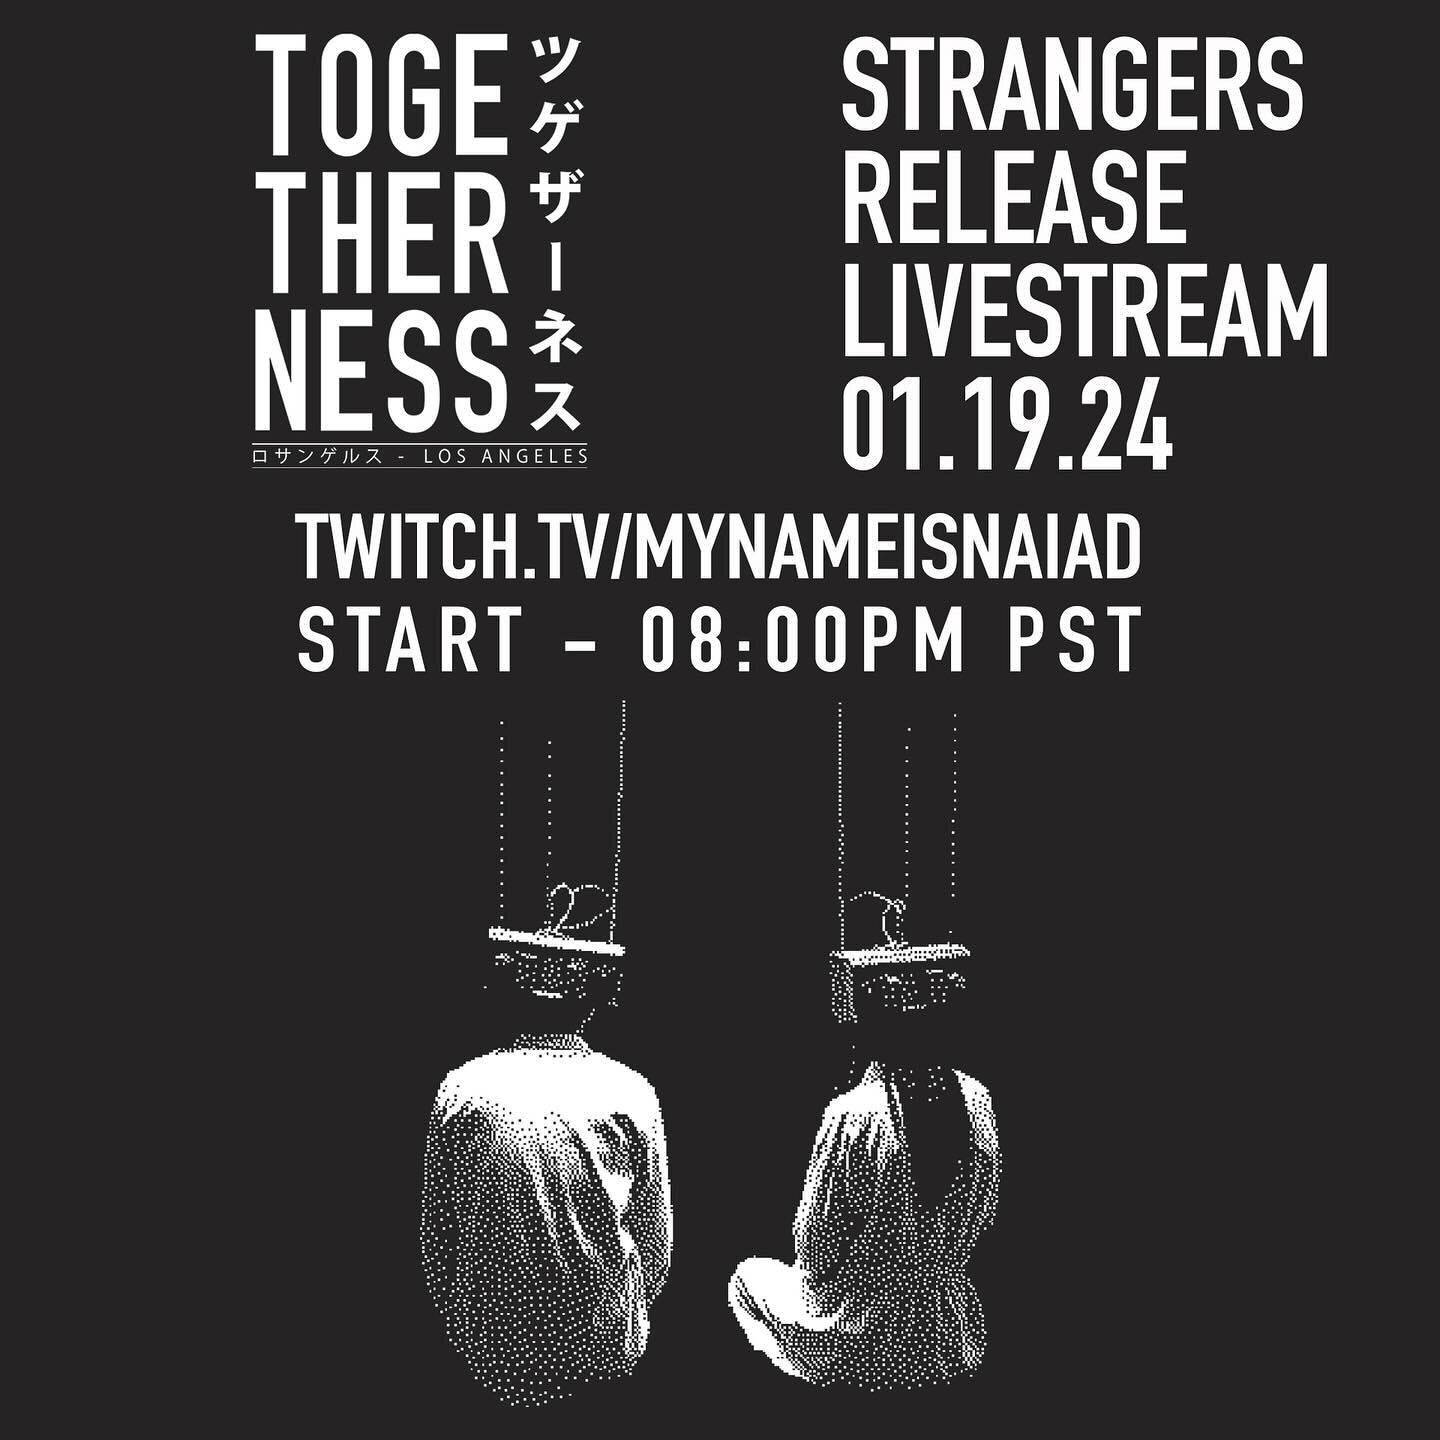 FRIDAY at 8pm PST Join me and @taylorplenn on @mynameisnaiad twitch channel for a special release livestream event. I&rsquo;ll be playing some house and other tunes and we&rsquo;ll be talking about the song and where you can score this sweet new merc